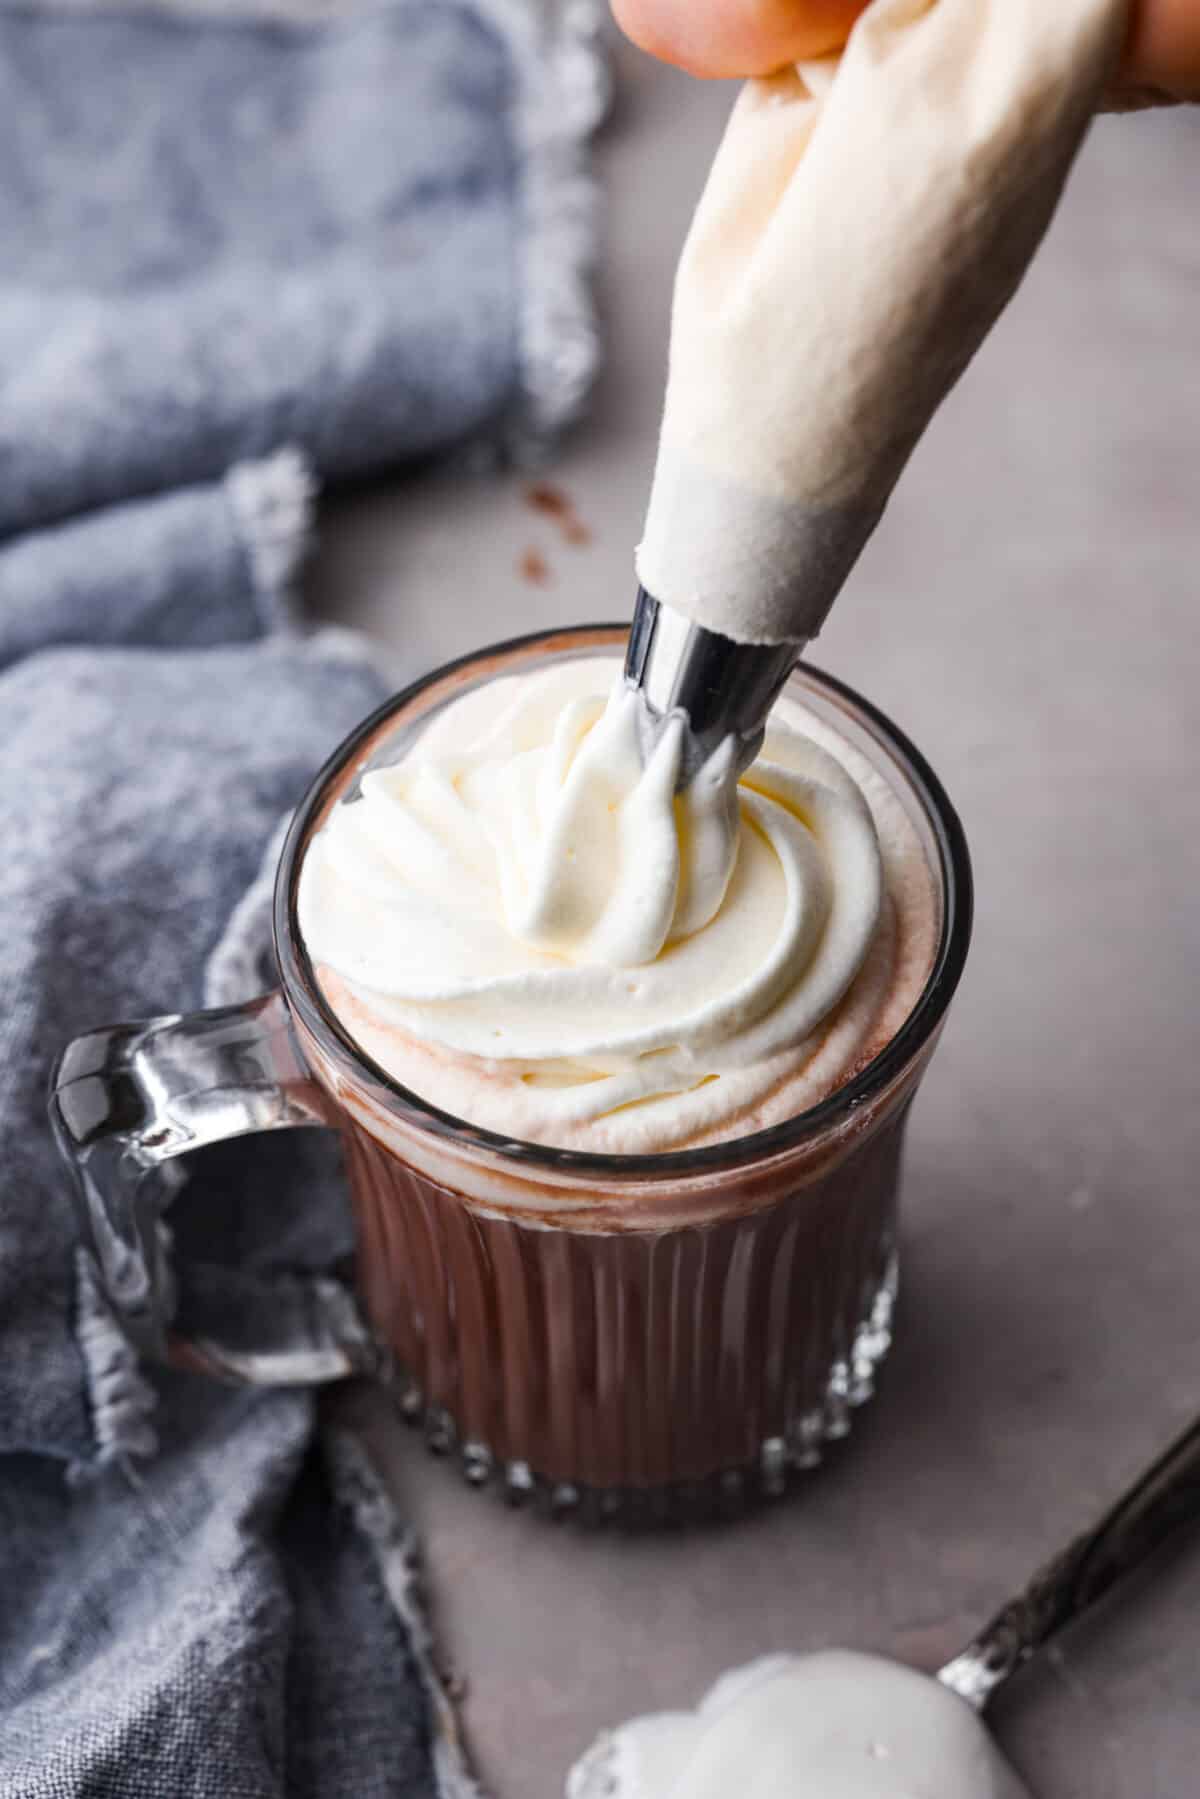 Adding a dollop of marshmallow cream to hot chocolate.